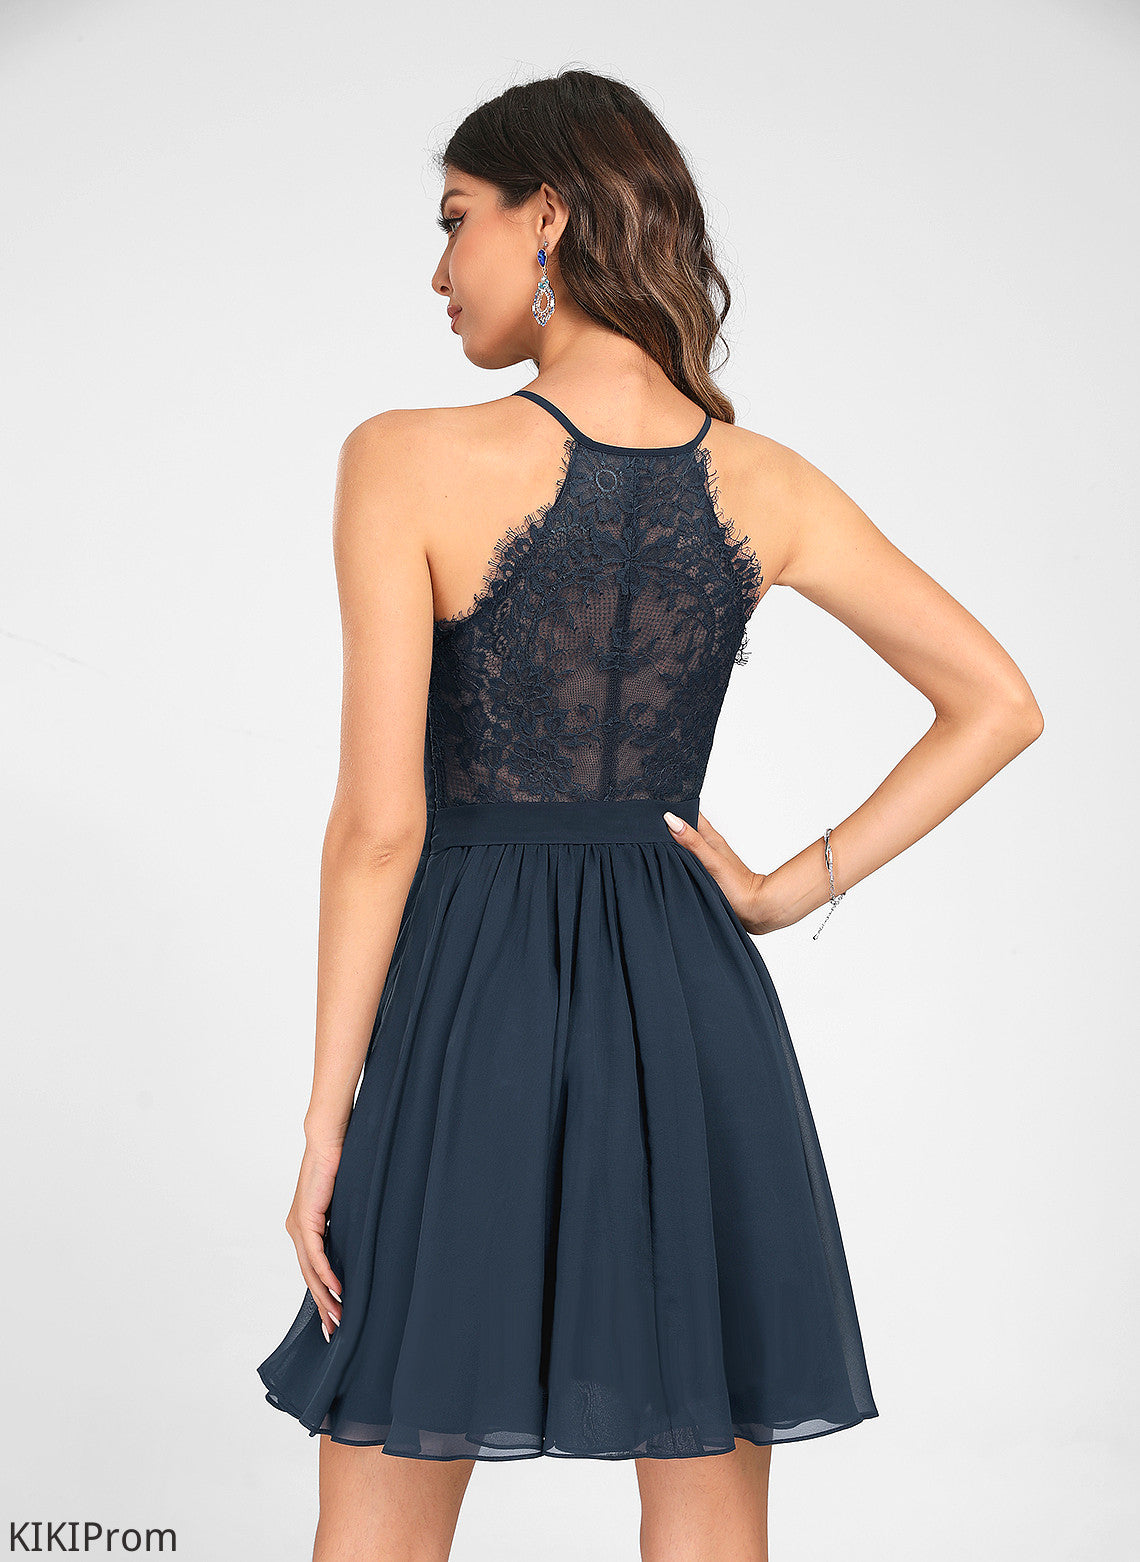 Short/Mini Lace A-Line Chiffon Adrianna V-neck Dress Homecoming With Homecoming Dresses